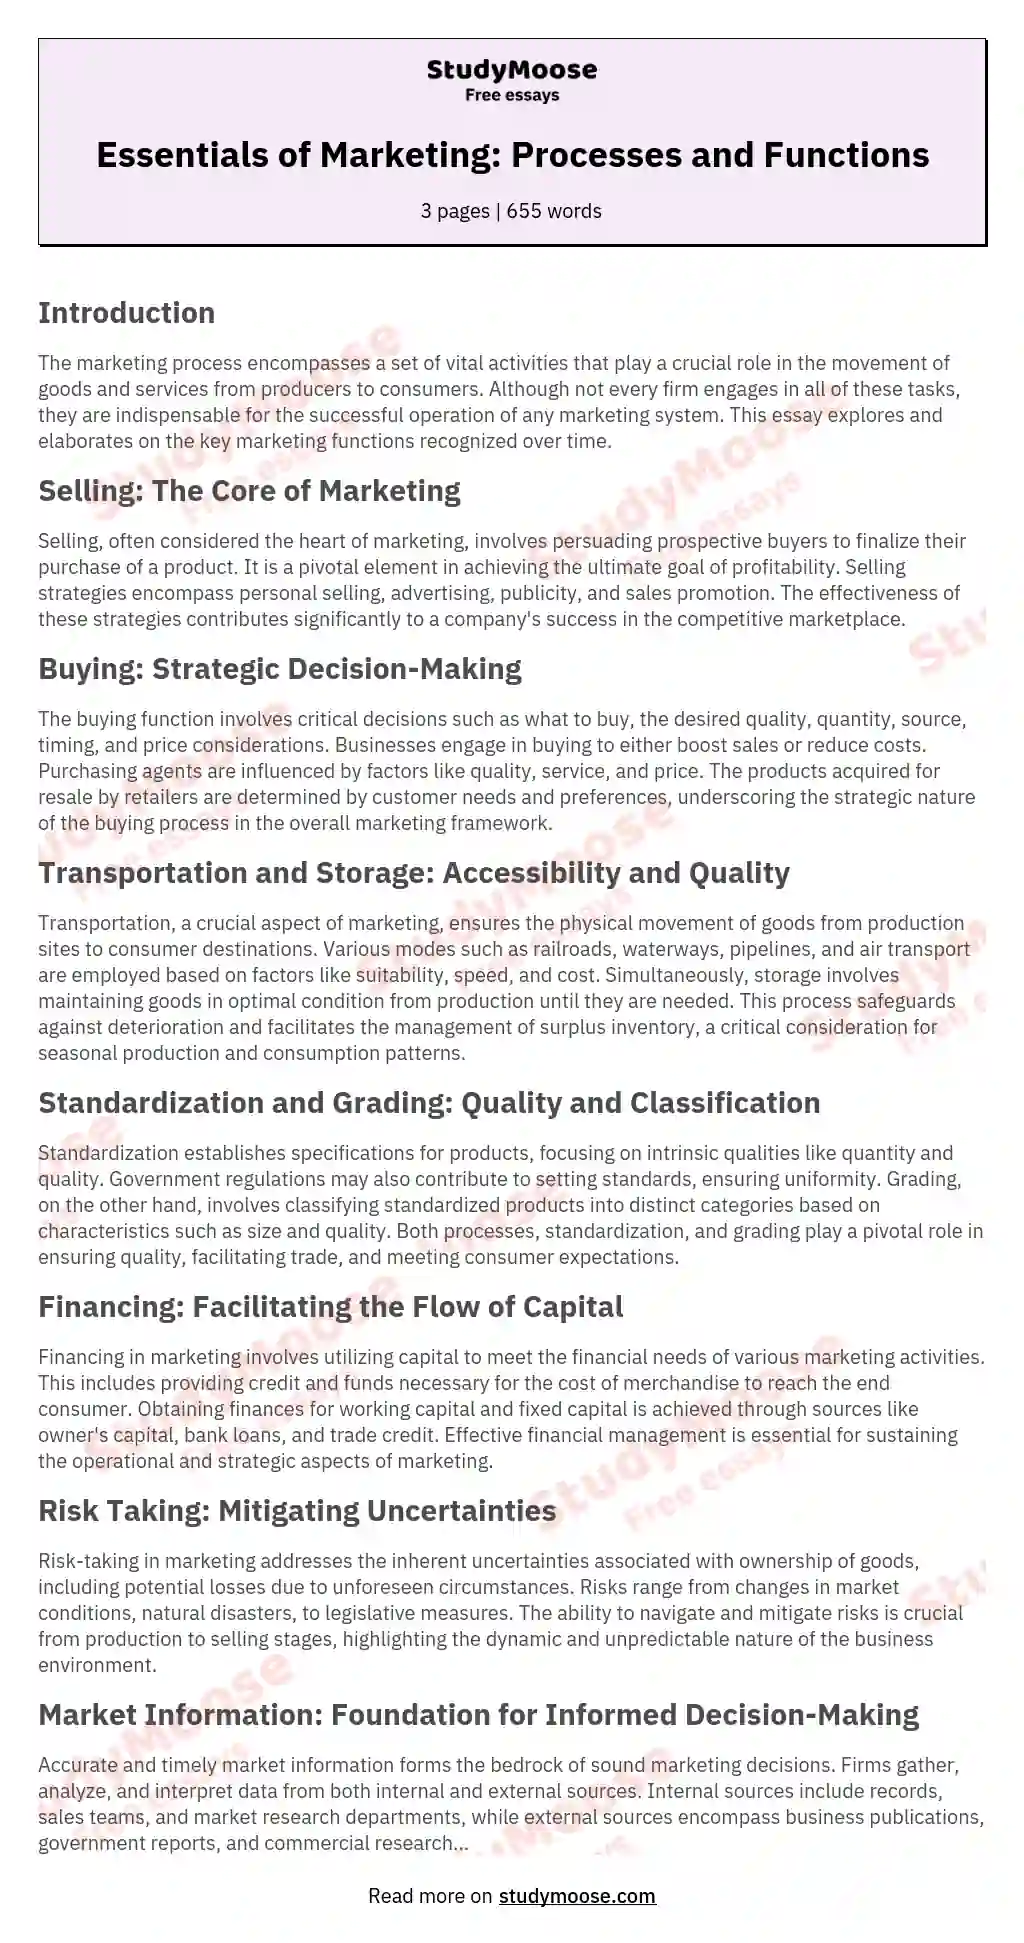 Essentials of Marketing: Processes and Functions essay